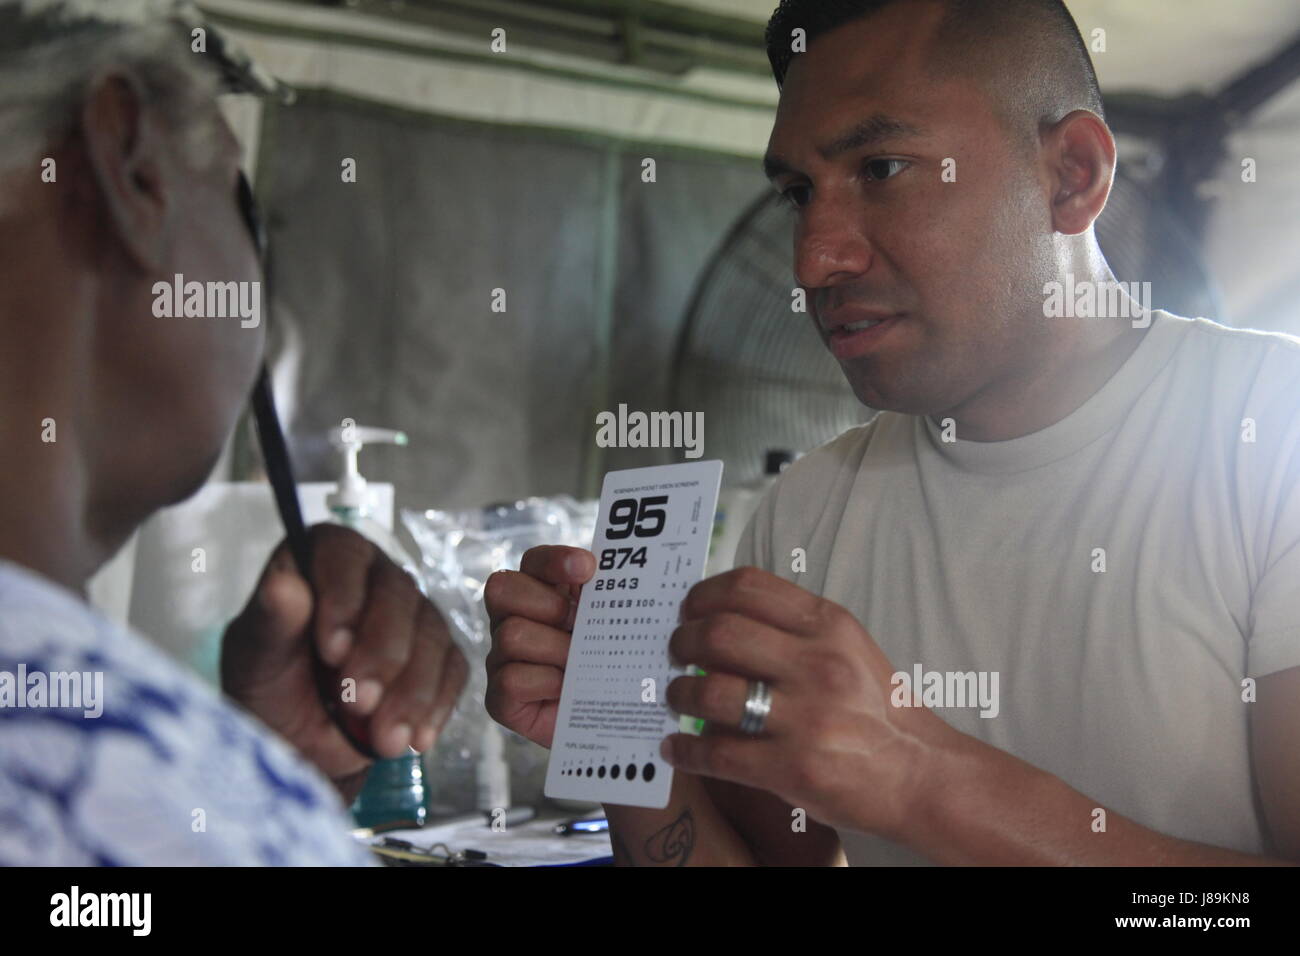 U.S. Air Force Tech Sgt. Benjamin Lemus, with the 96th Medical Support Group from Eglin Air Force Base, Florida, checks patient's vision at a medical readiness event in Dangriga, Belize, May 22, 2017. This is the third and final medical event scheduled for Beyond the Horizon 2017, a U.S. Southern Command-sponsored, Army South-led exercise designed to provide humanitarian and engineering services to communities in need, demonstrating U.S. support for Belize. (U.S. Army photo by Spc. Kelson Brooks) (RELEASED) Stock Photo